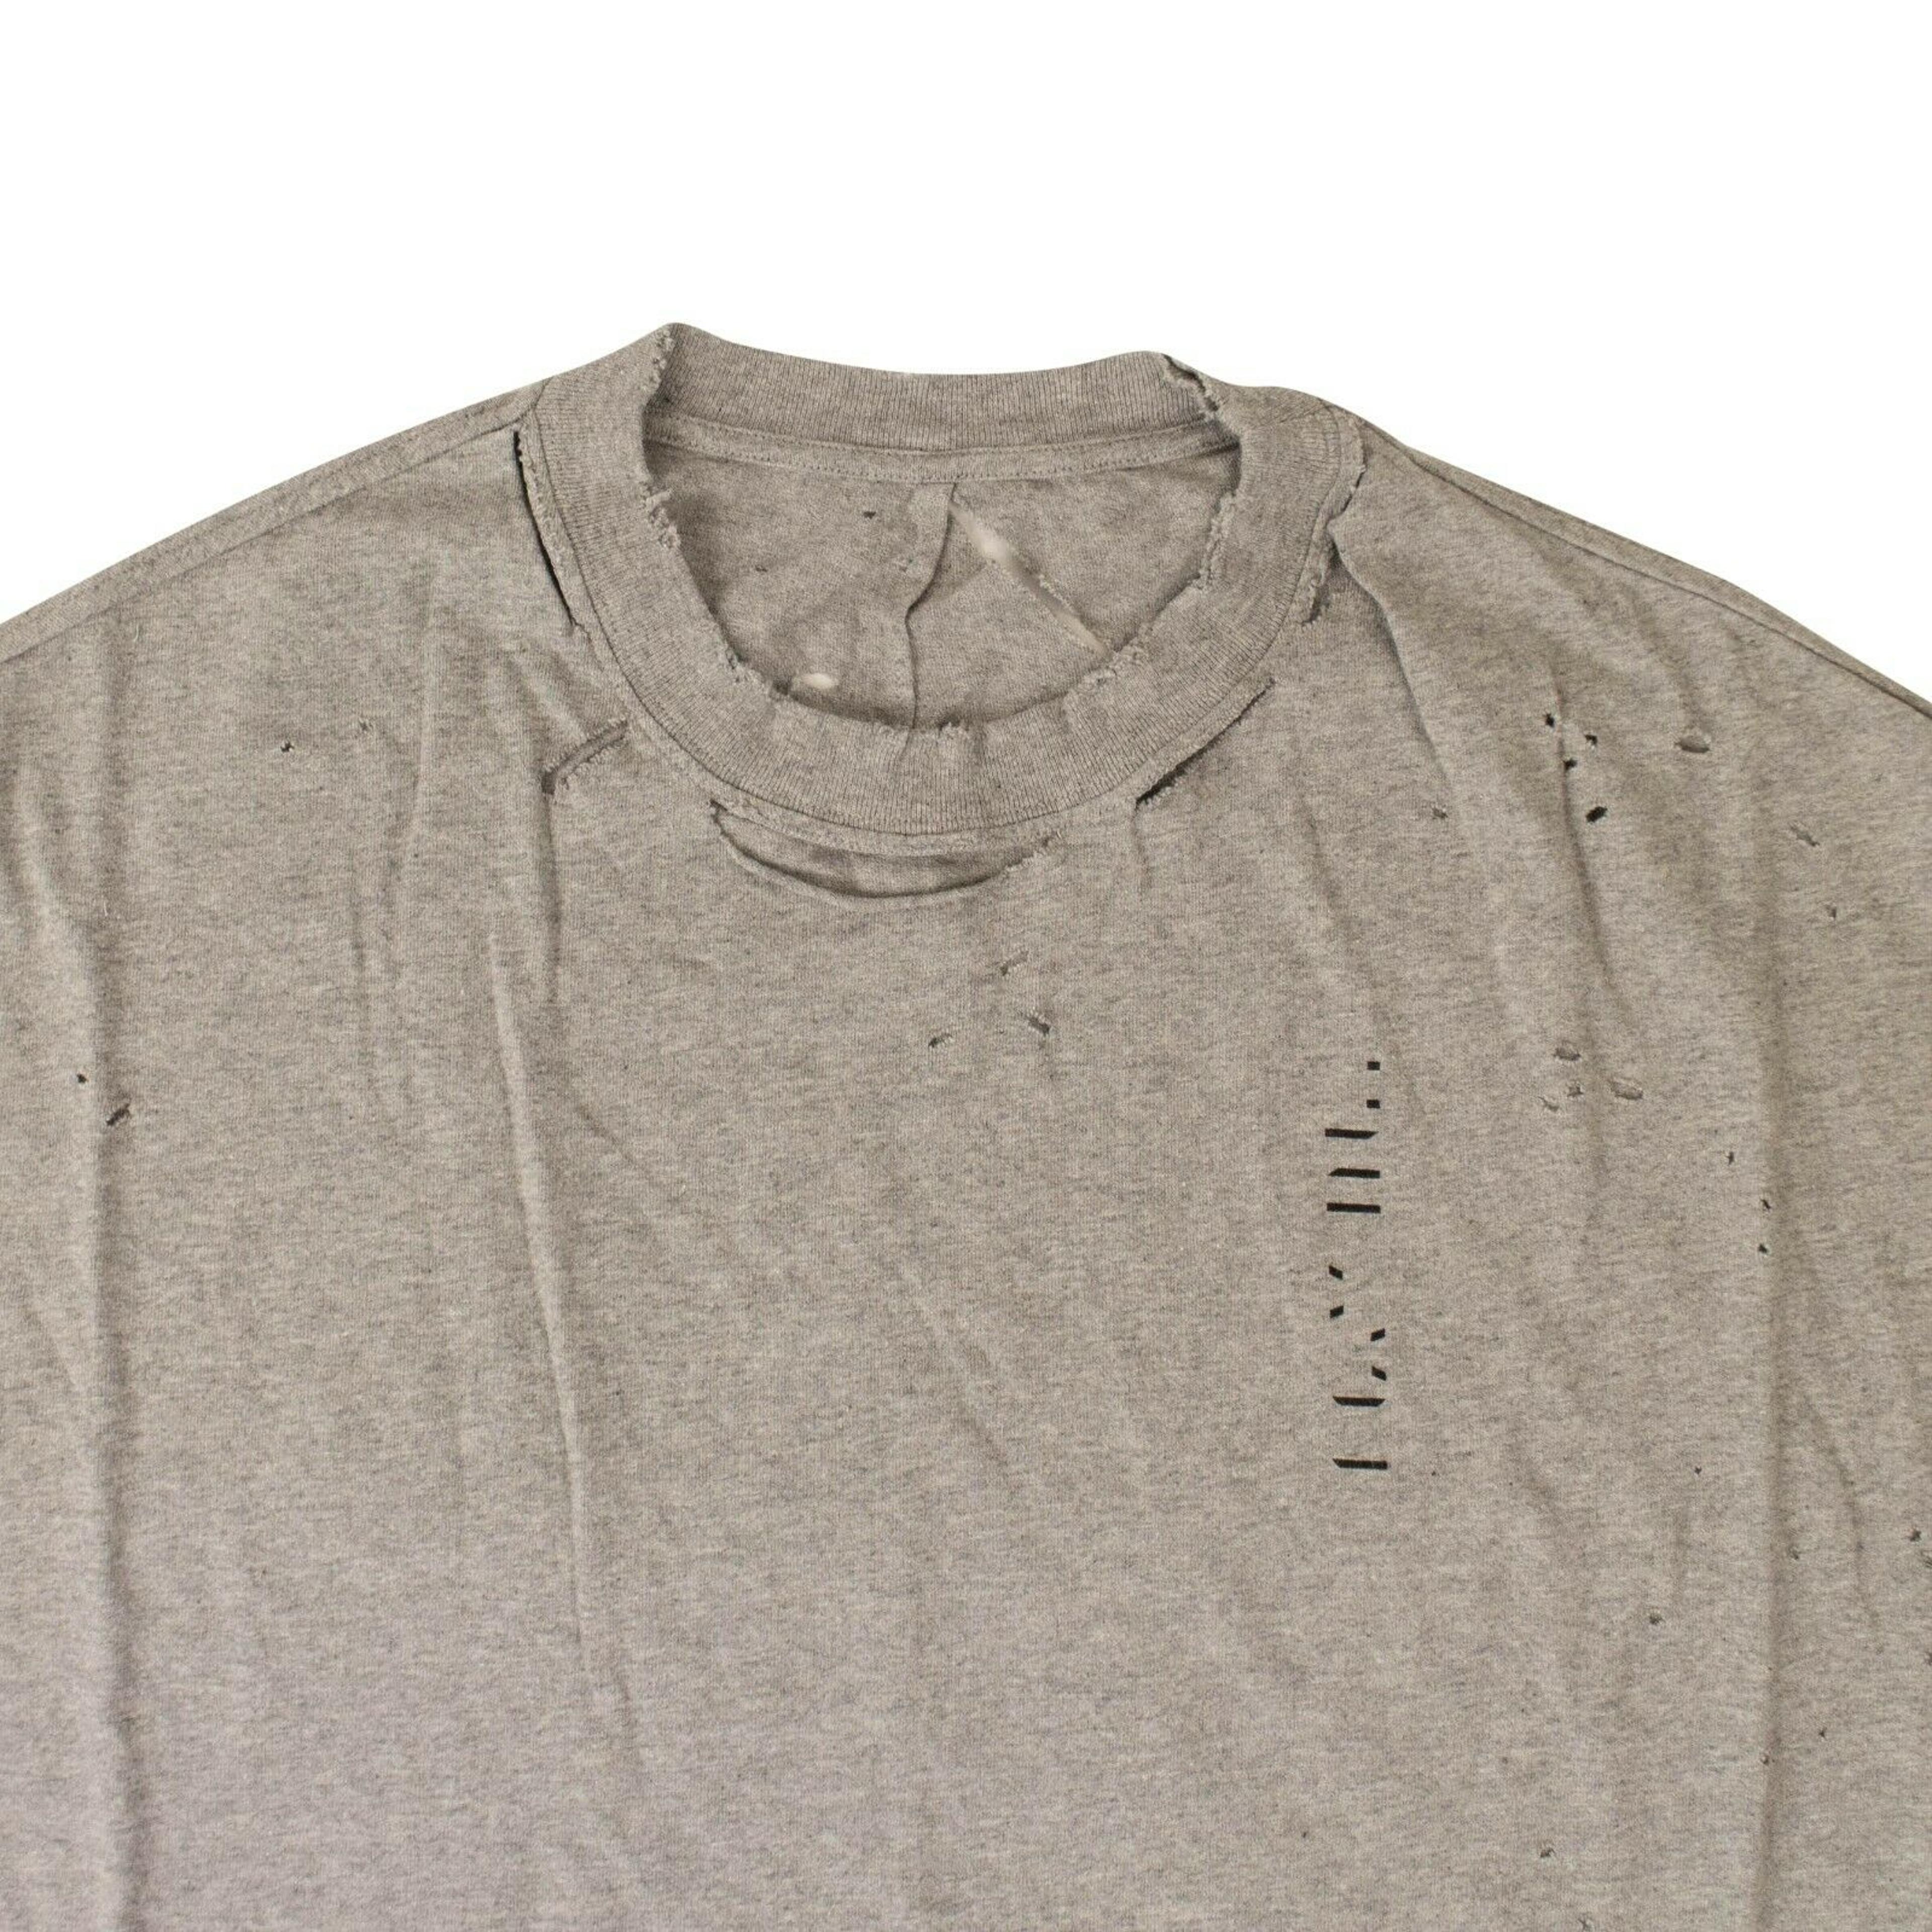 Alternate View 1 of Gray Distressed T-Shirt